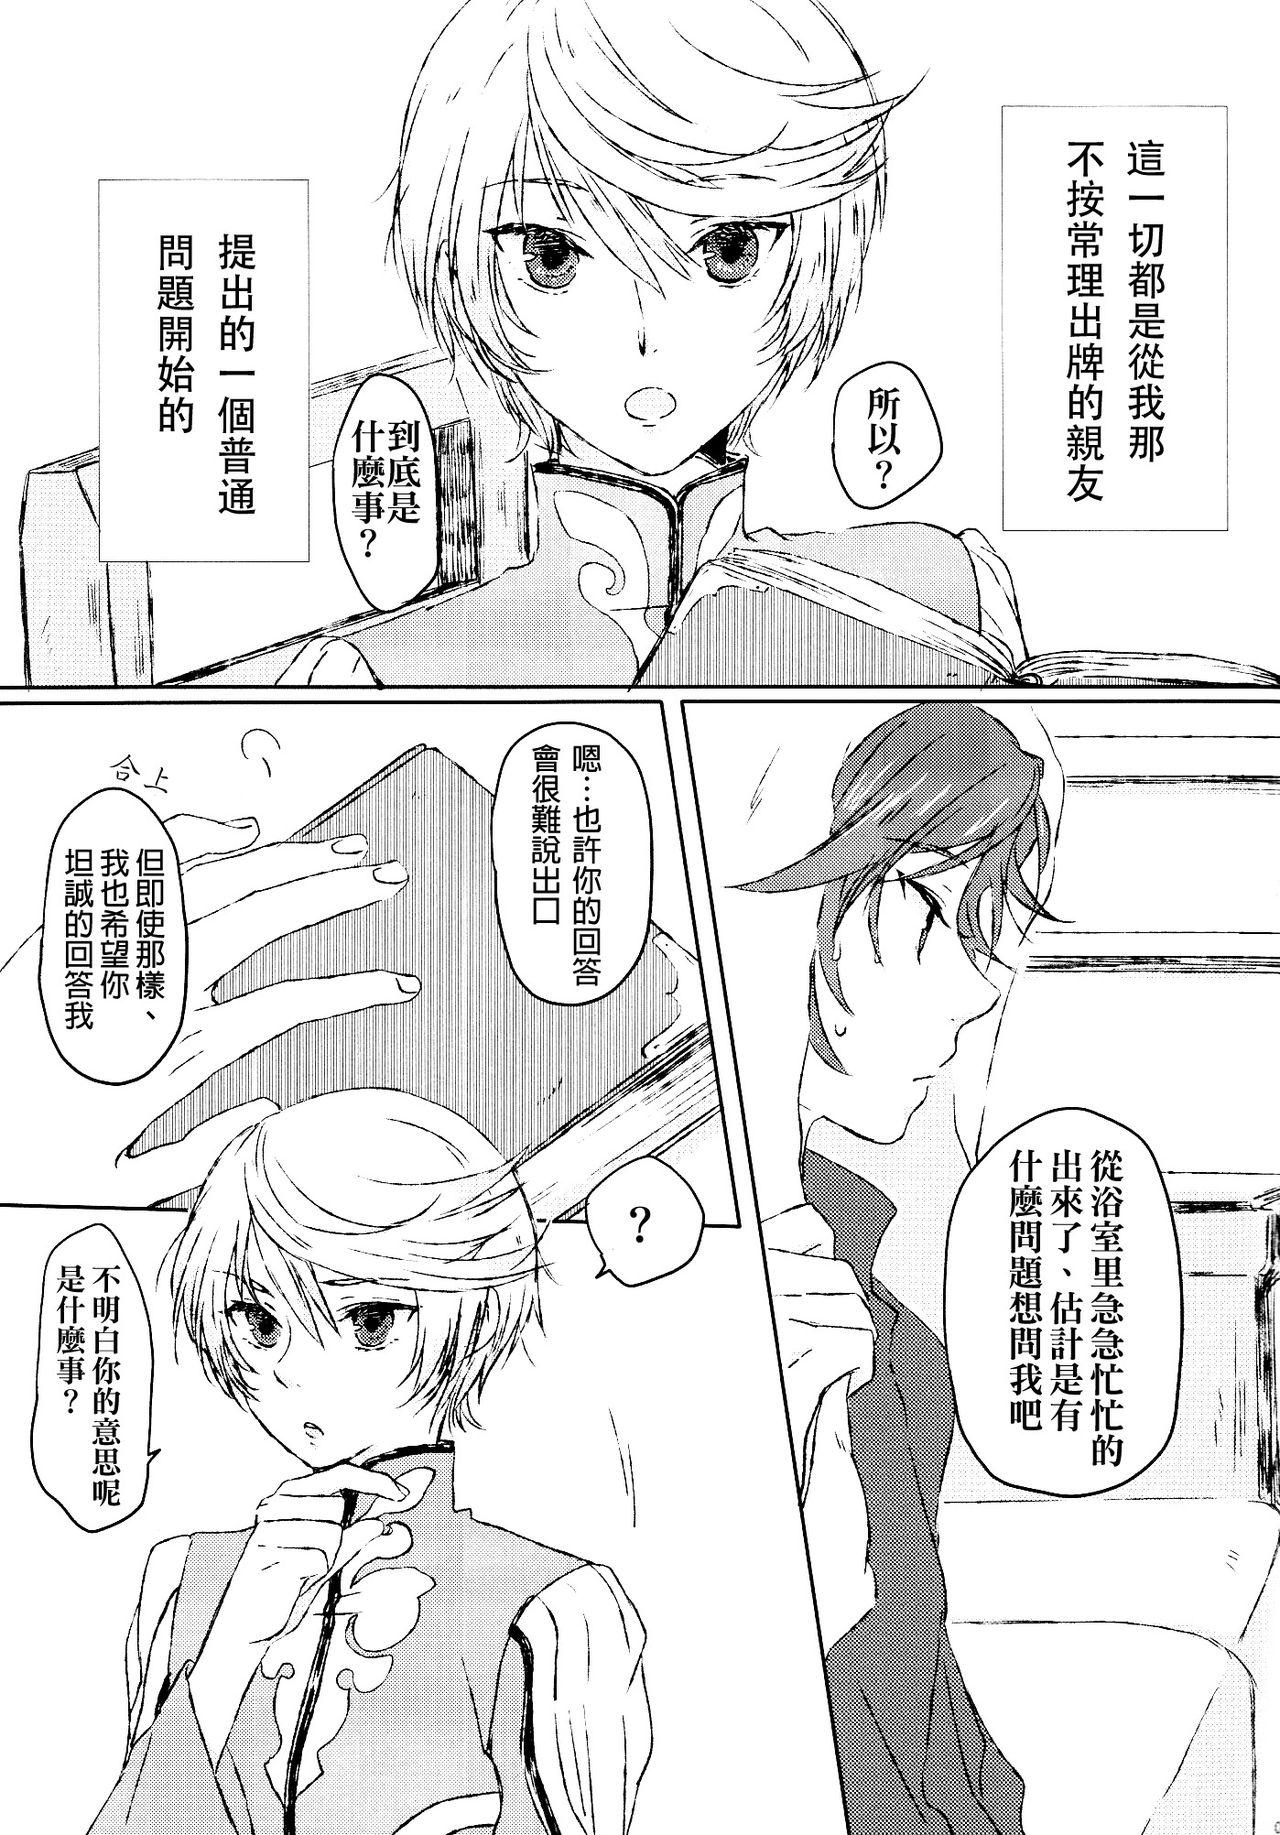 Yanks Featured Chiguhagu Syndrome - Tales of zestiria Fake - Page 5